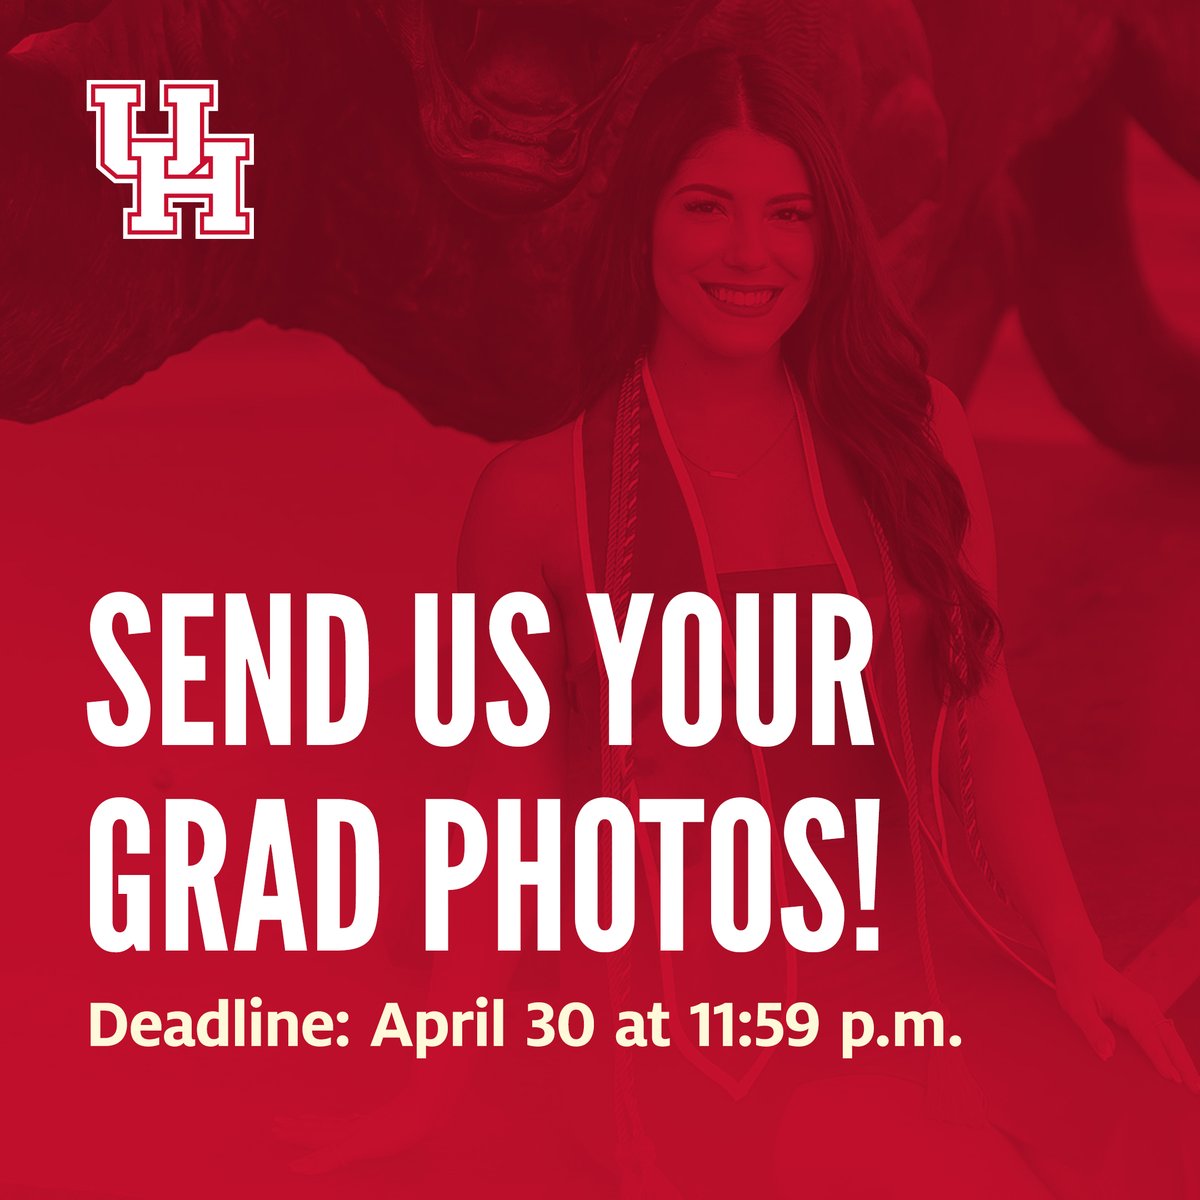 Graduating this May? Send us your grad photos to be part of the commencement pre-show and have a chance to see them on our social media! 📸🎓 Submit your photos here: uh.edu/grad-photos?ut…